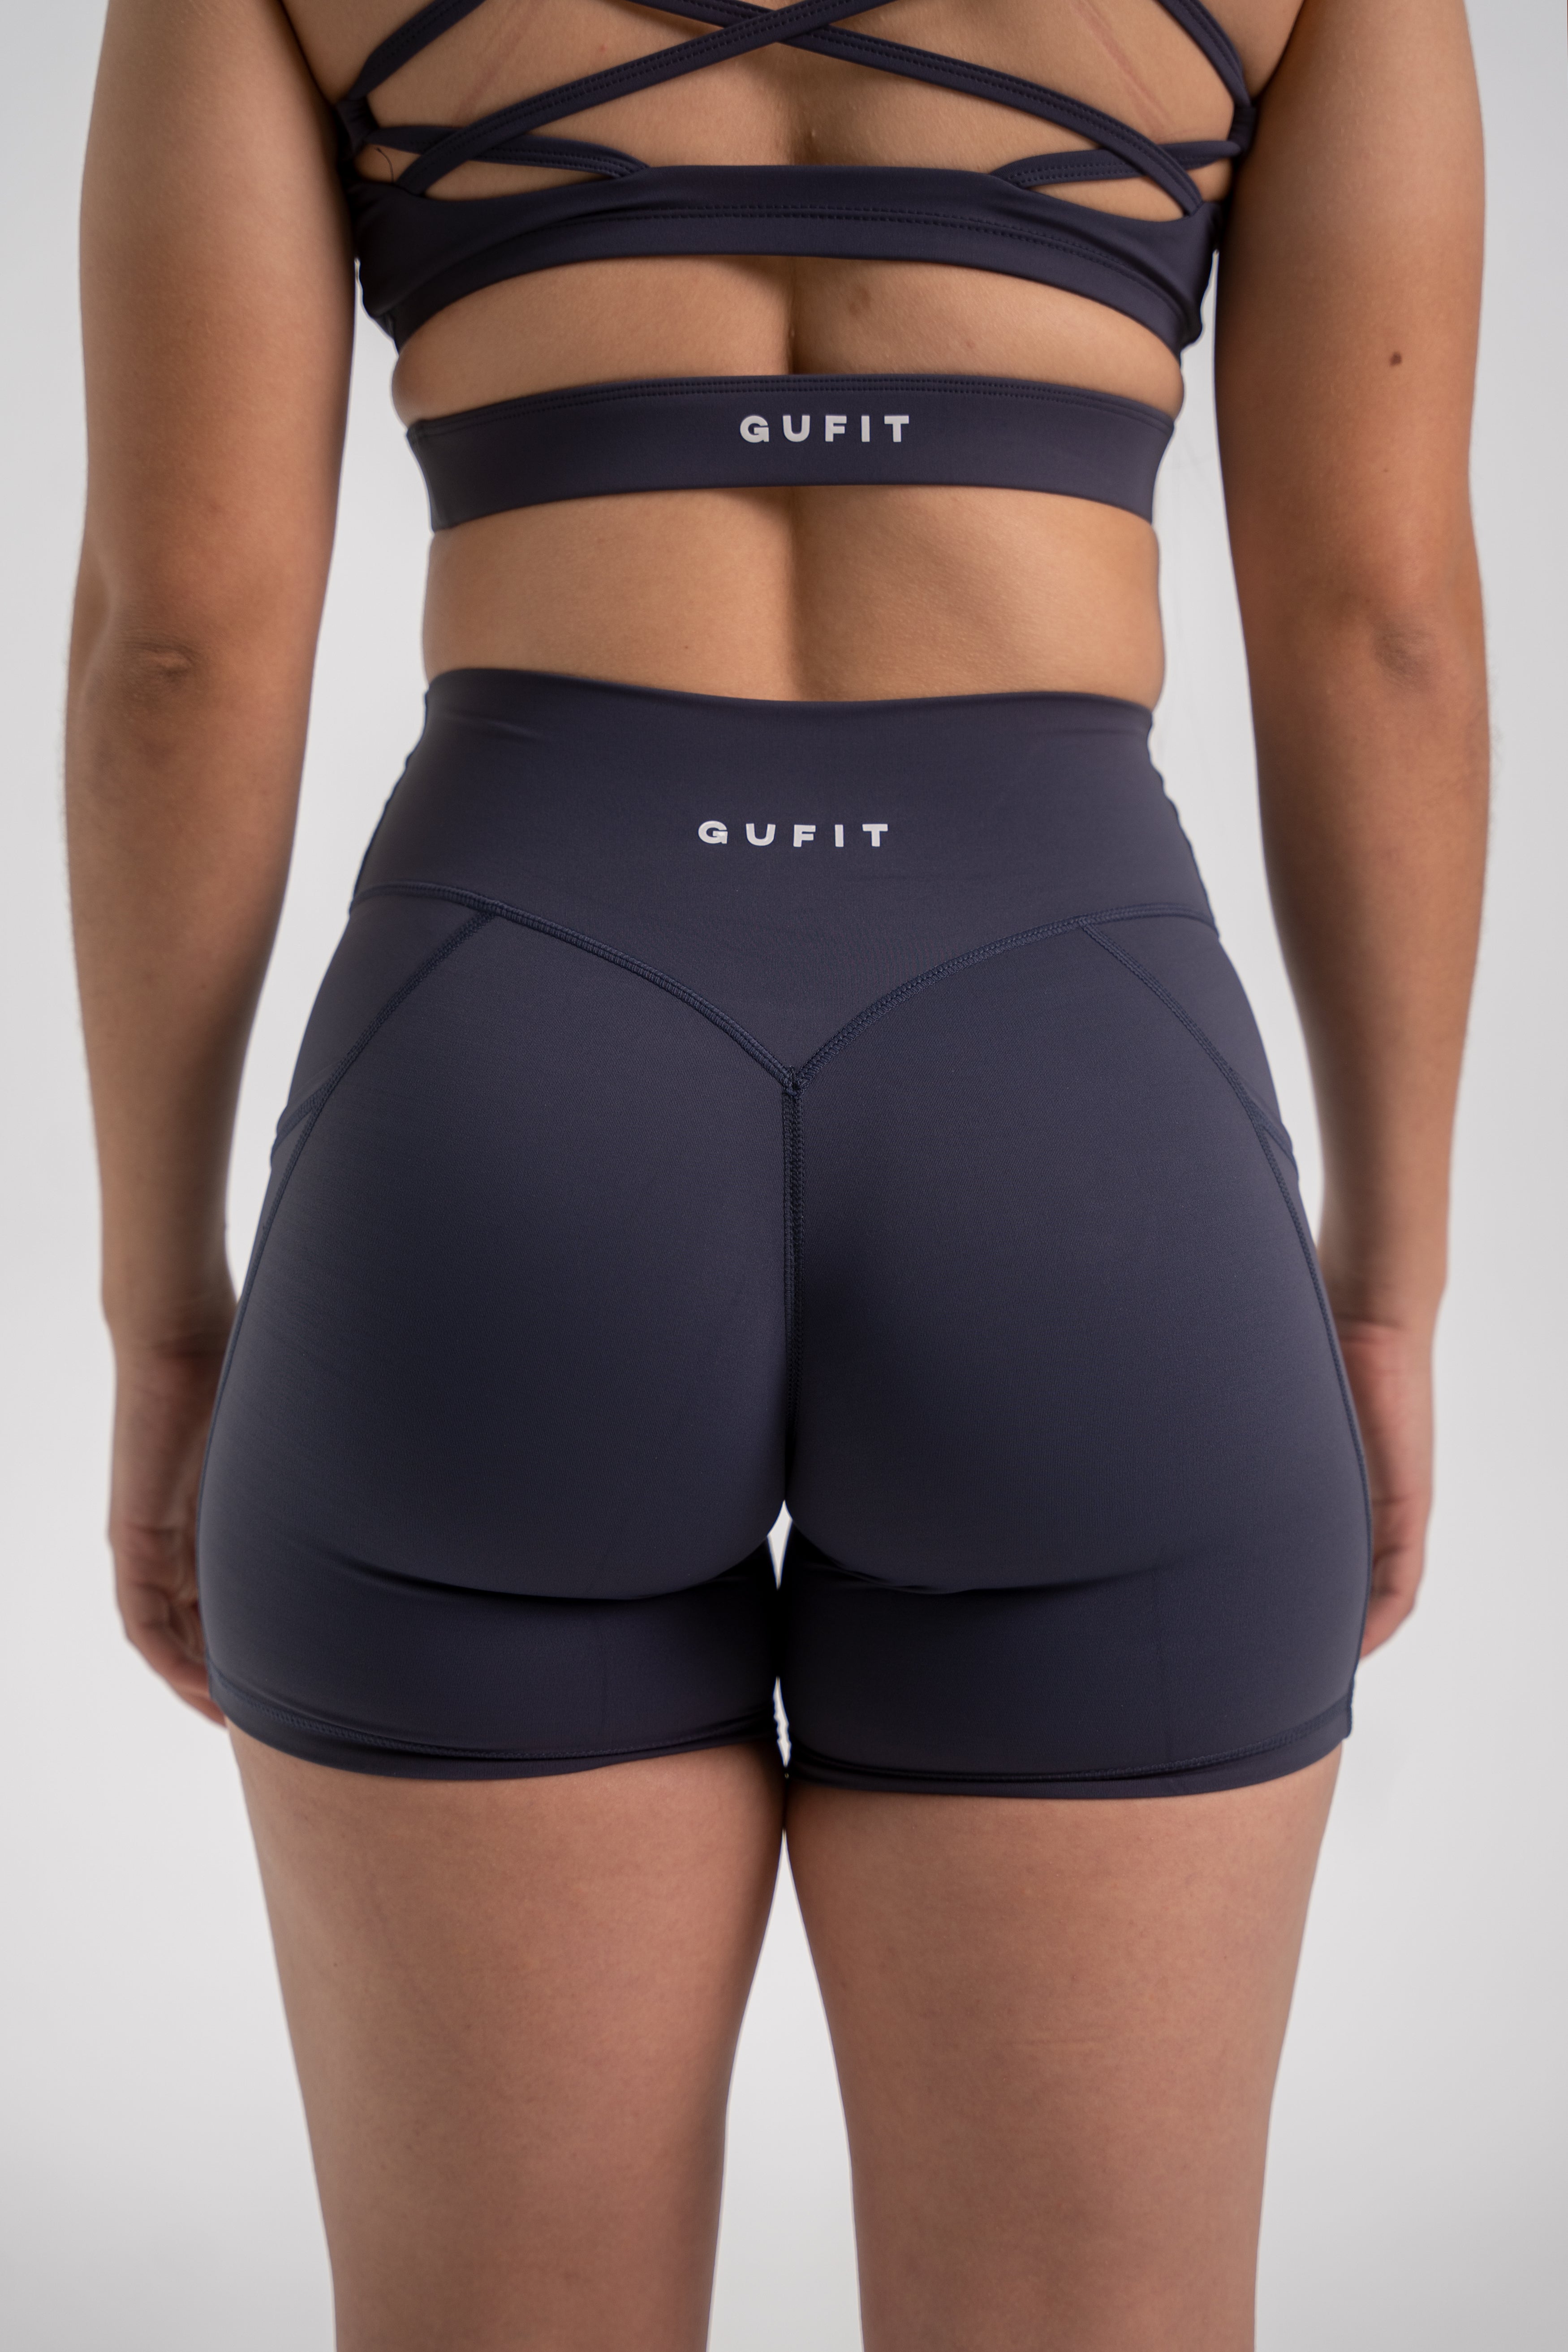 Spectacle Shorts - GUFIT